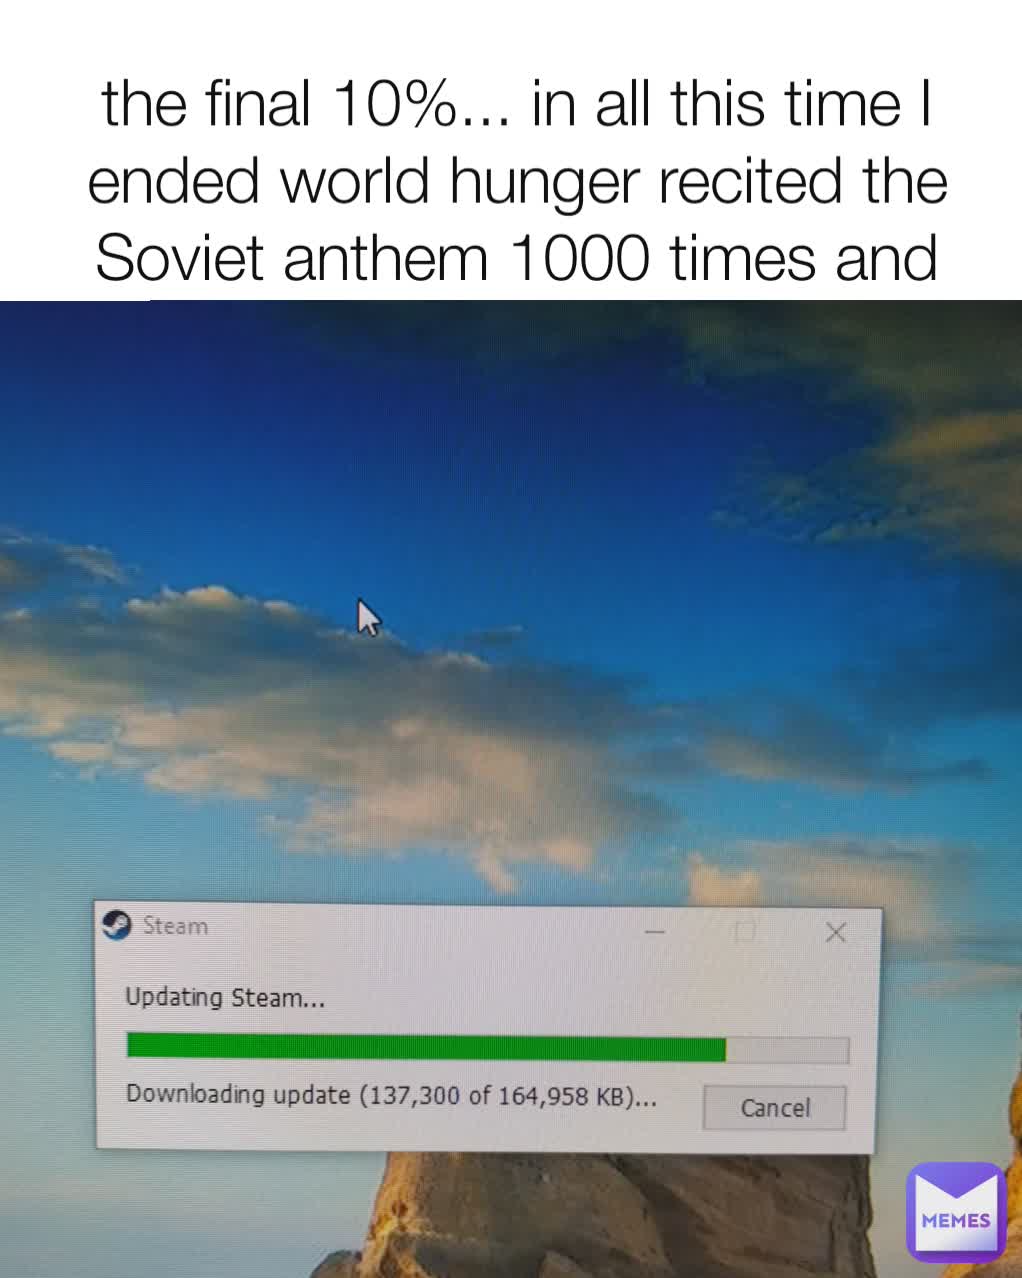 the final 10%... in all this time I ended world hunger recited the Soviet anthem 1000 times and cured cancer! now all I need to do is repost this for 10 years until the last bit loads!